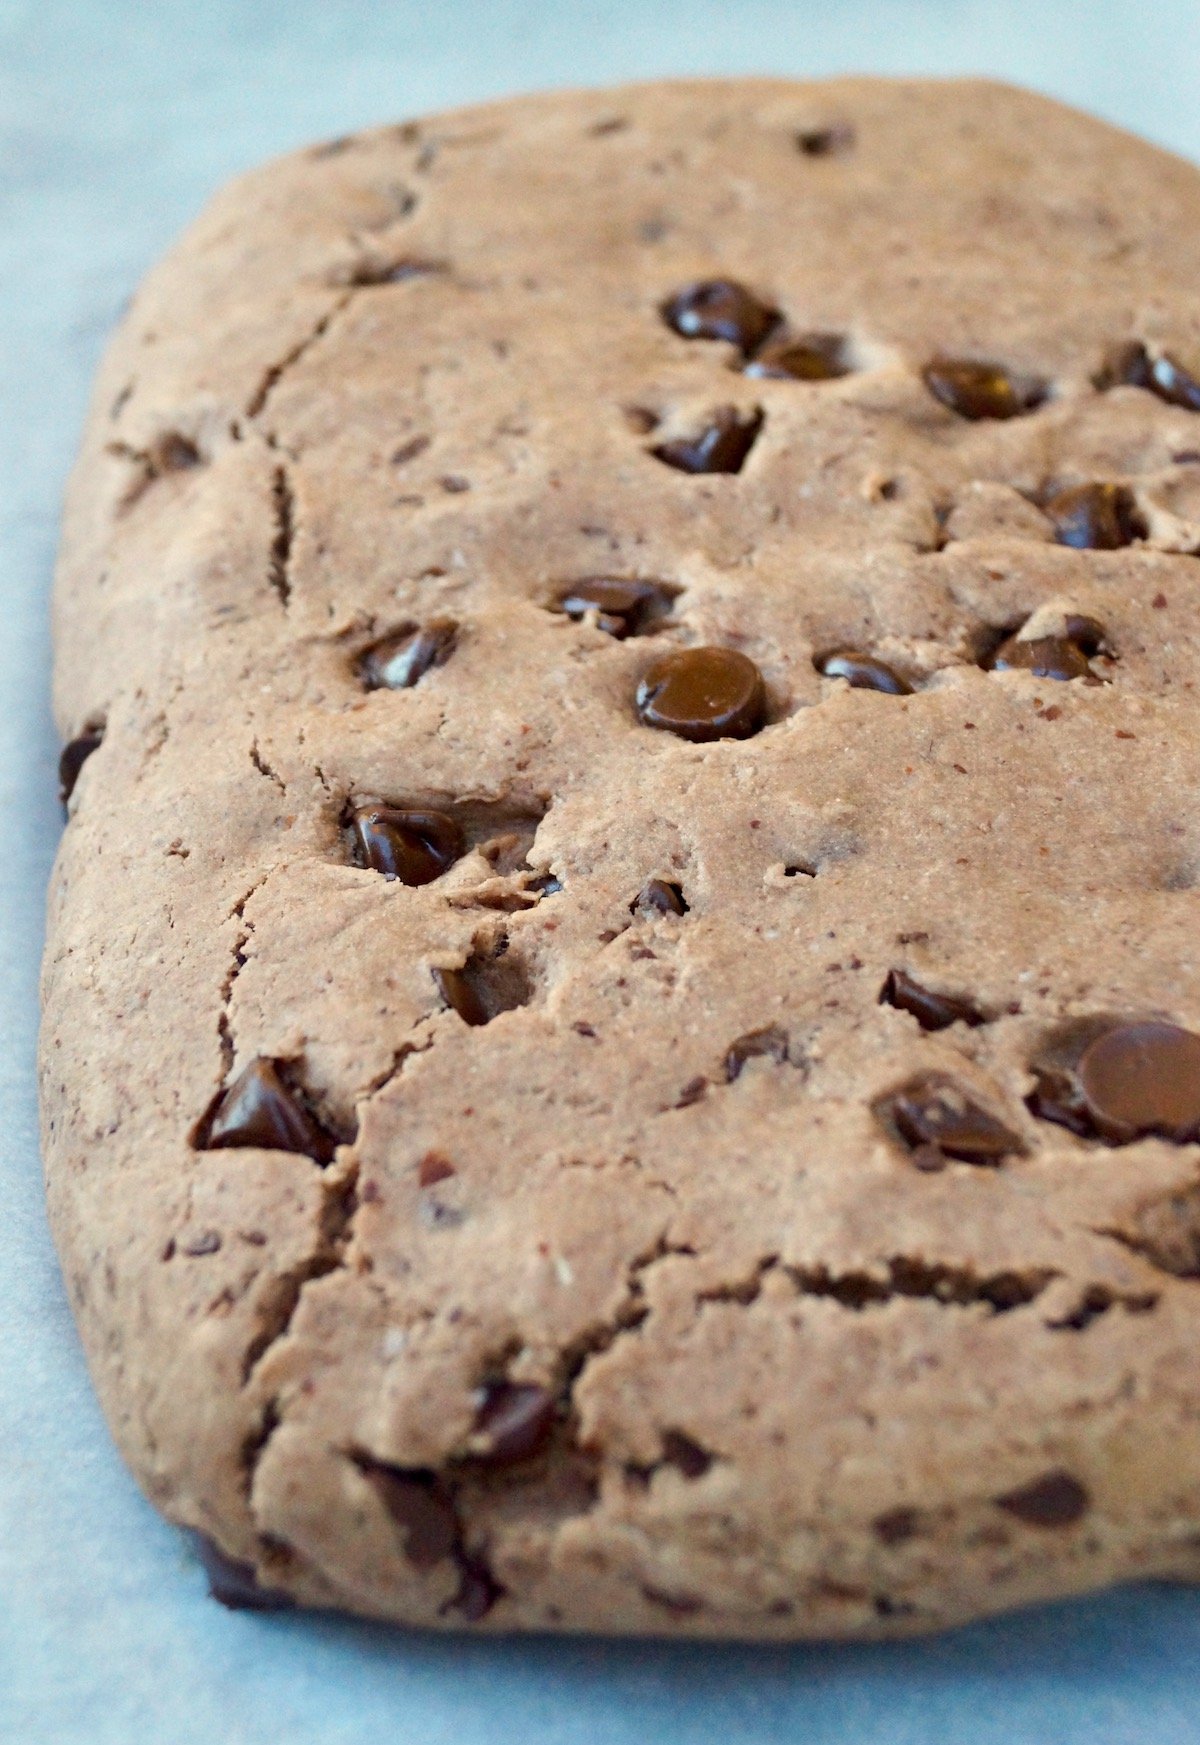 Baked slab of Glute-Free Chocolate Biscotti